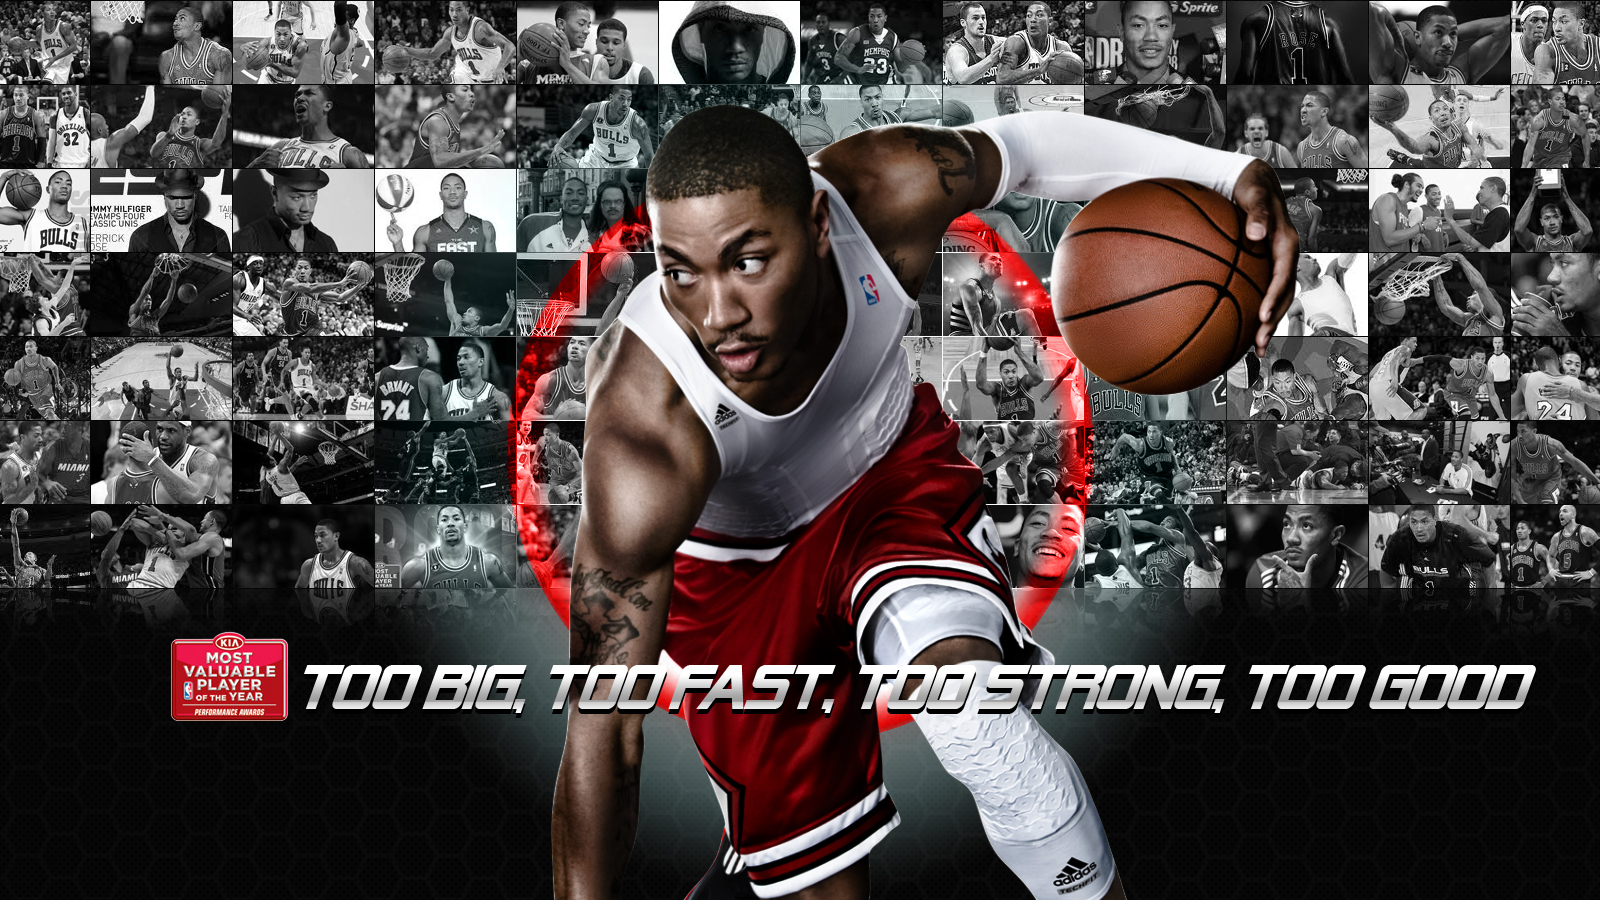 Derrick Rose To Big To Fast To Good - HD Wallpaper 